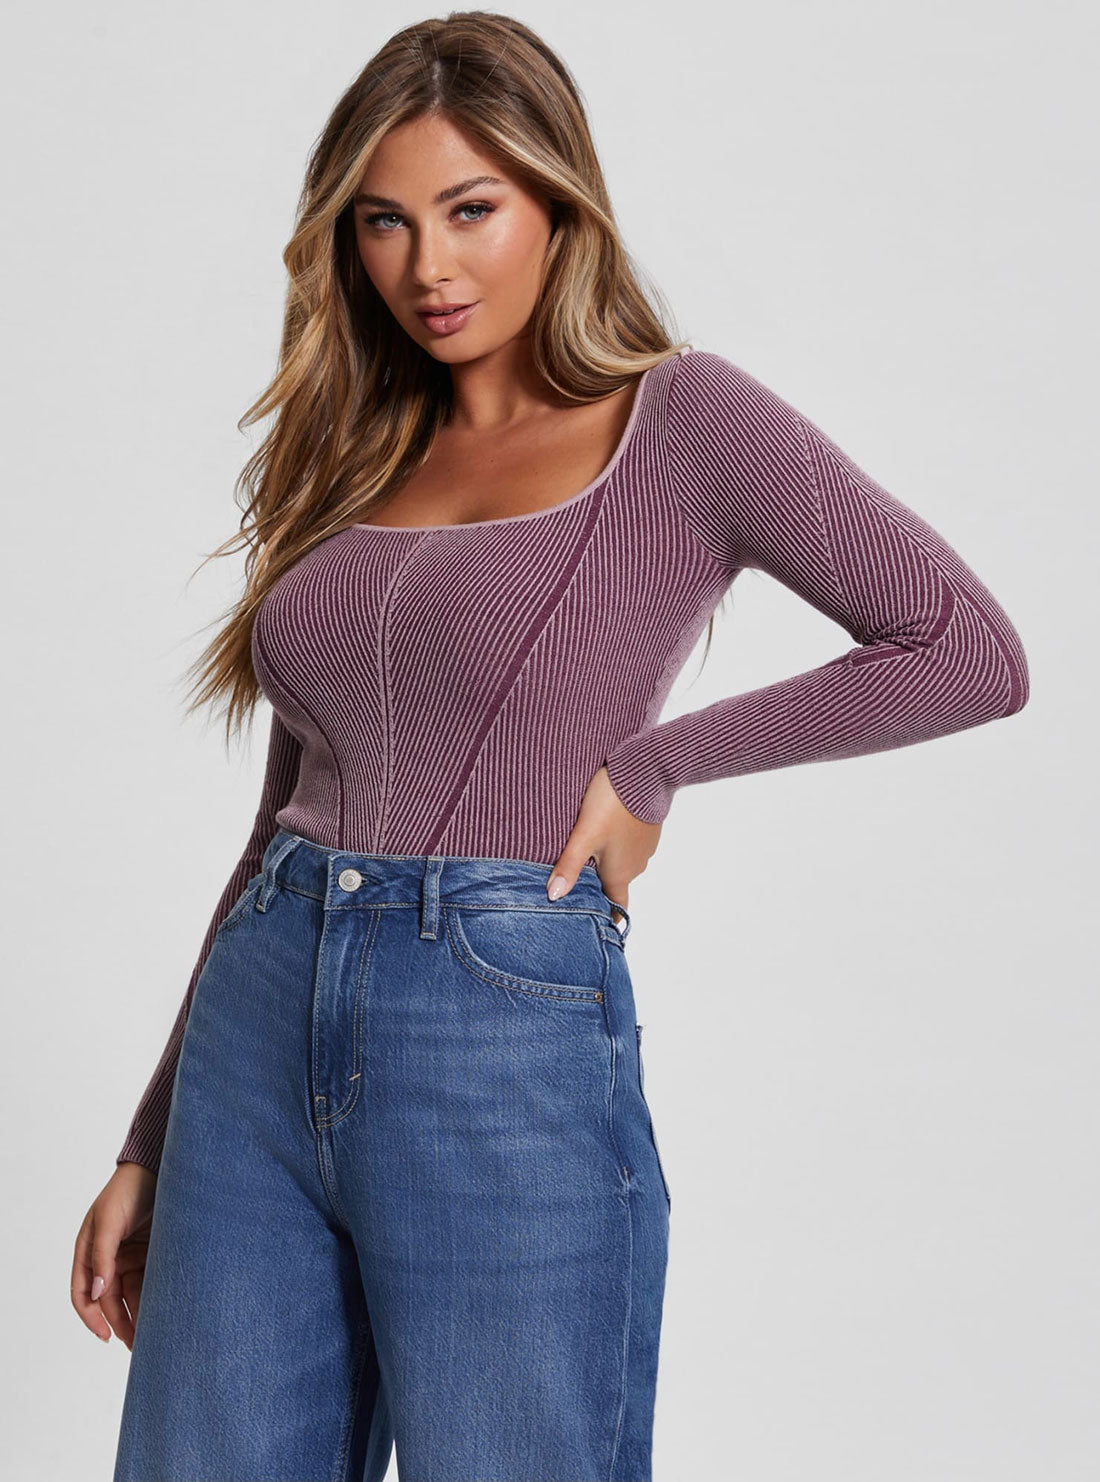 Eco Purple Blandine Knit Top | GUESS Women's Apparel | front view